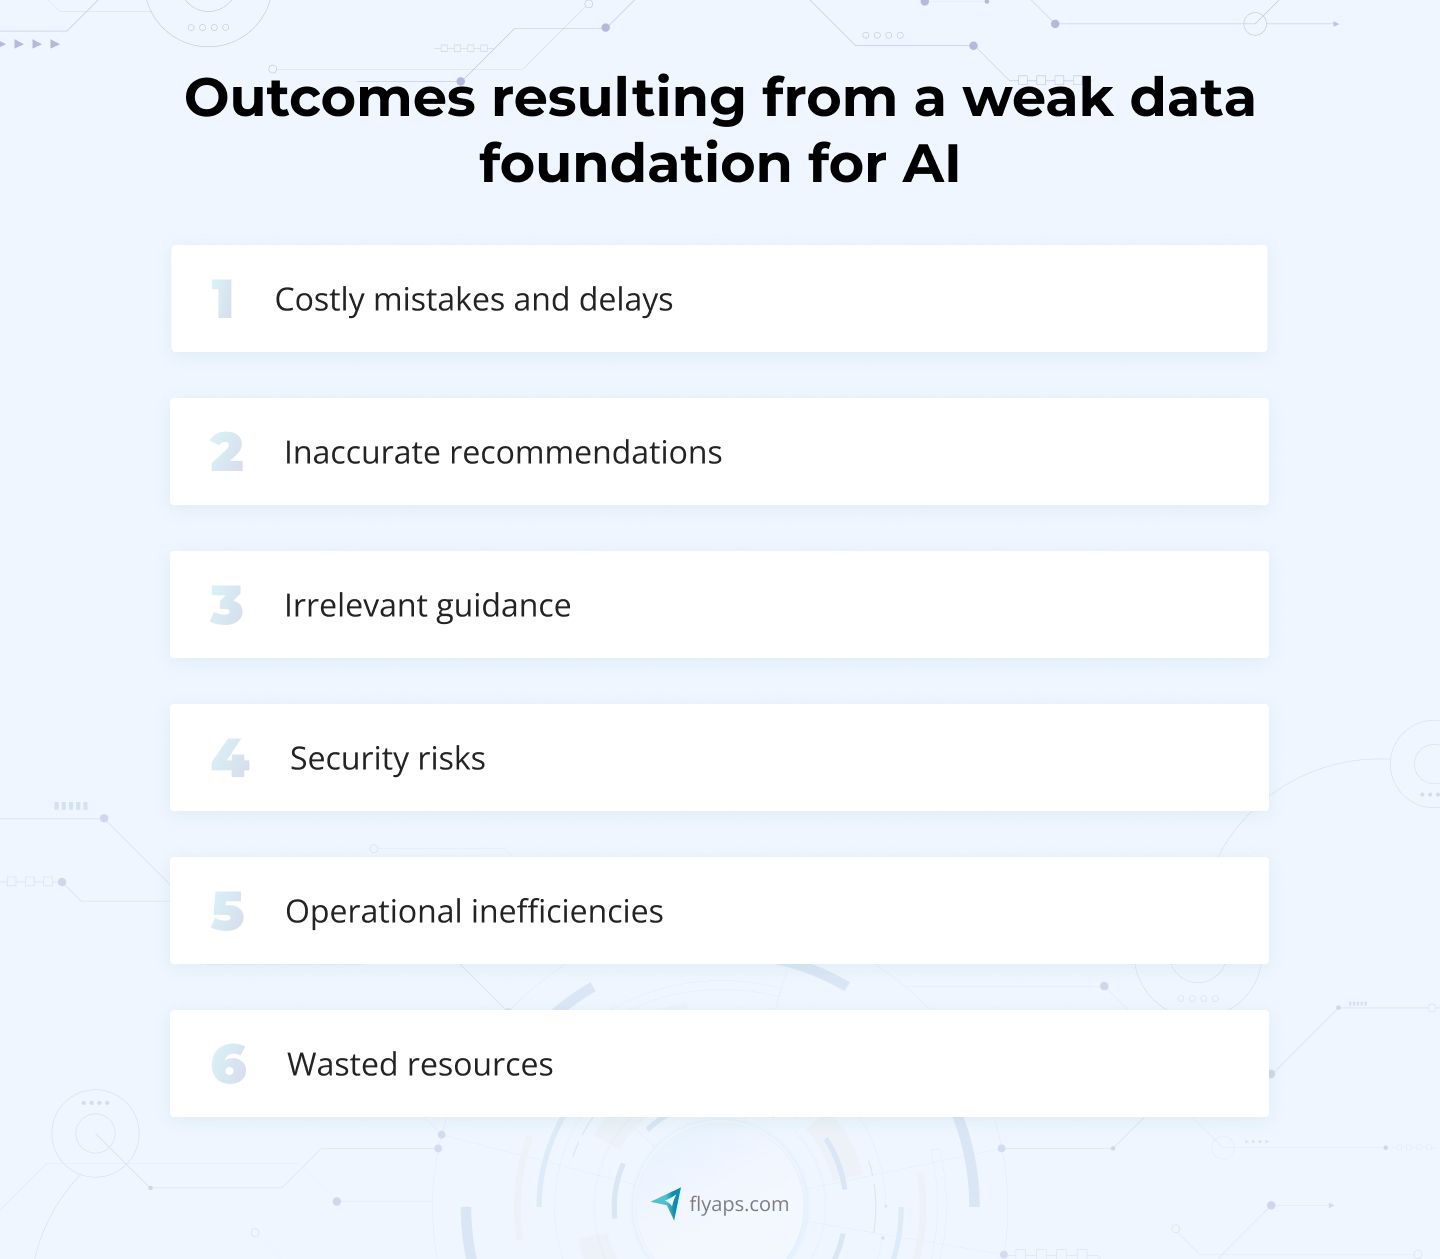 Outcomes resulting from a weak data foundation for AI